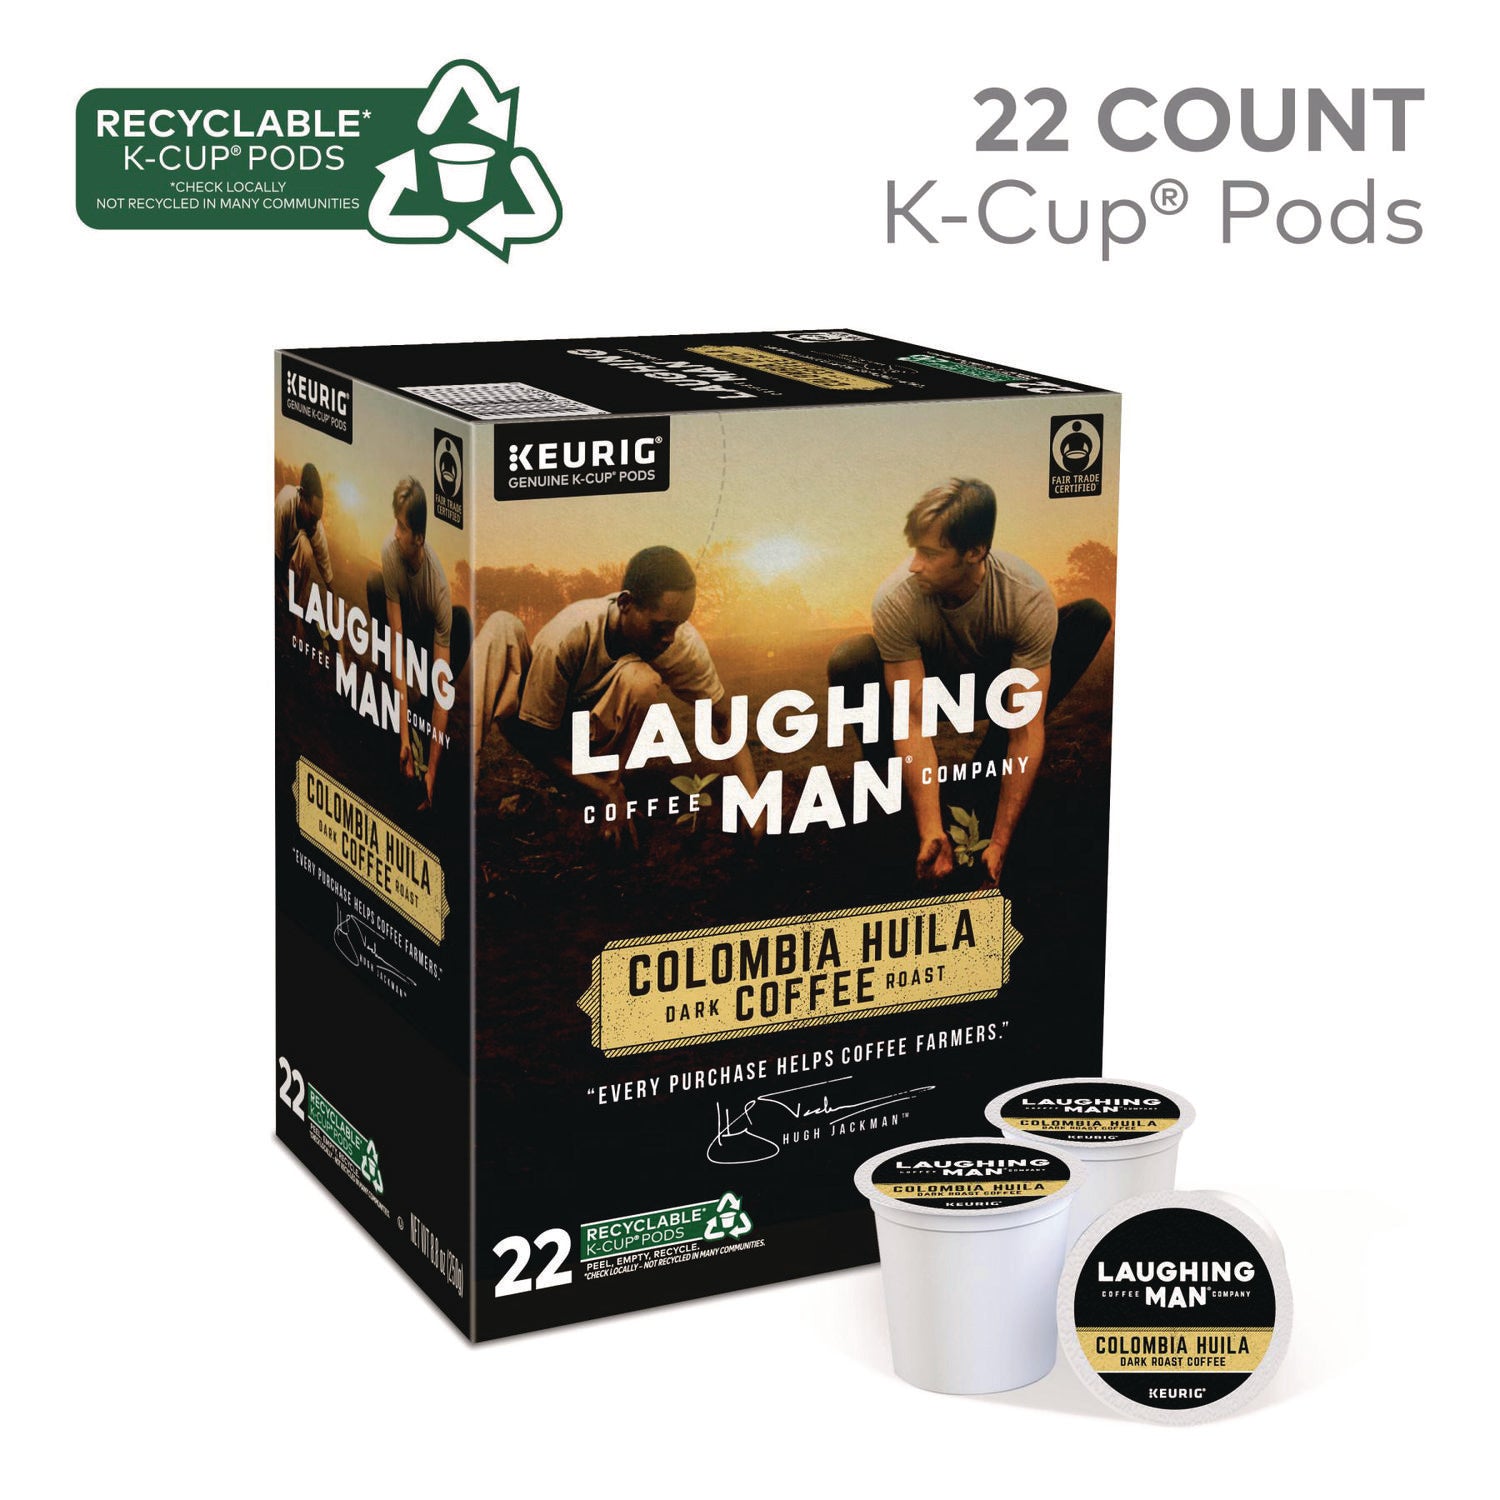 Colombia Huila K-Cup Pods, 22/Box - 6